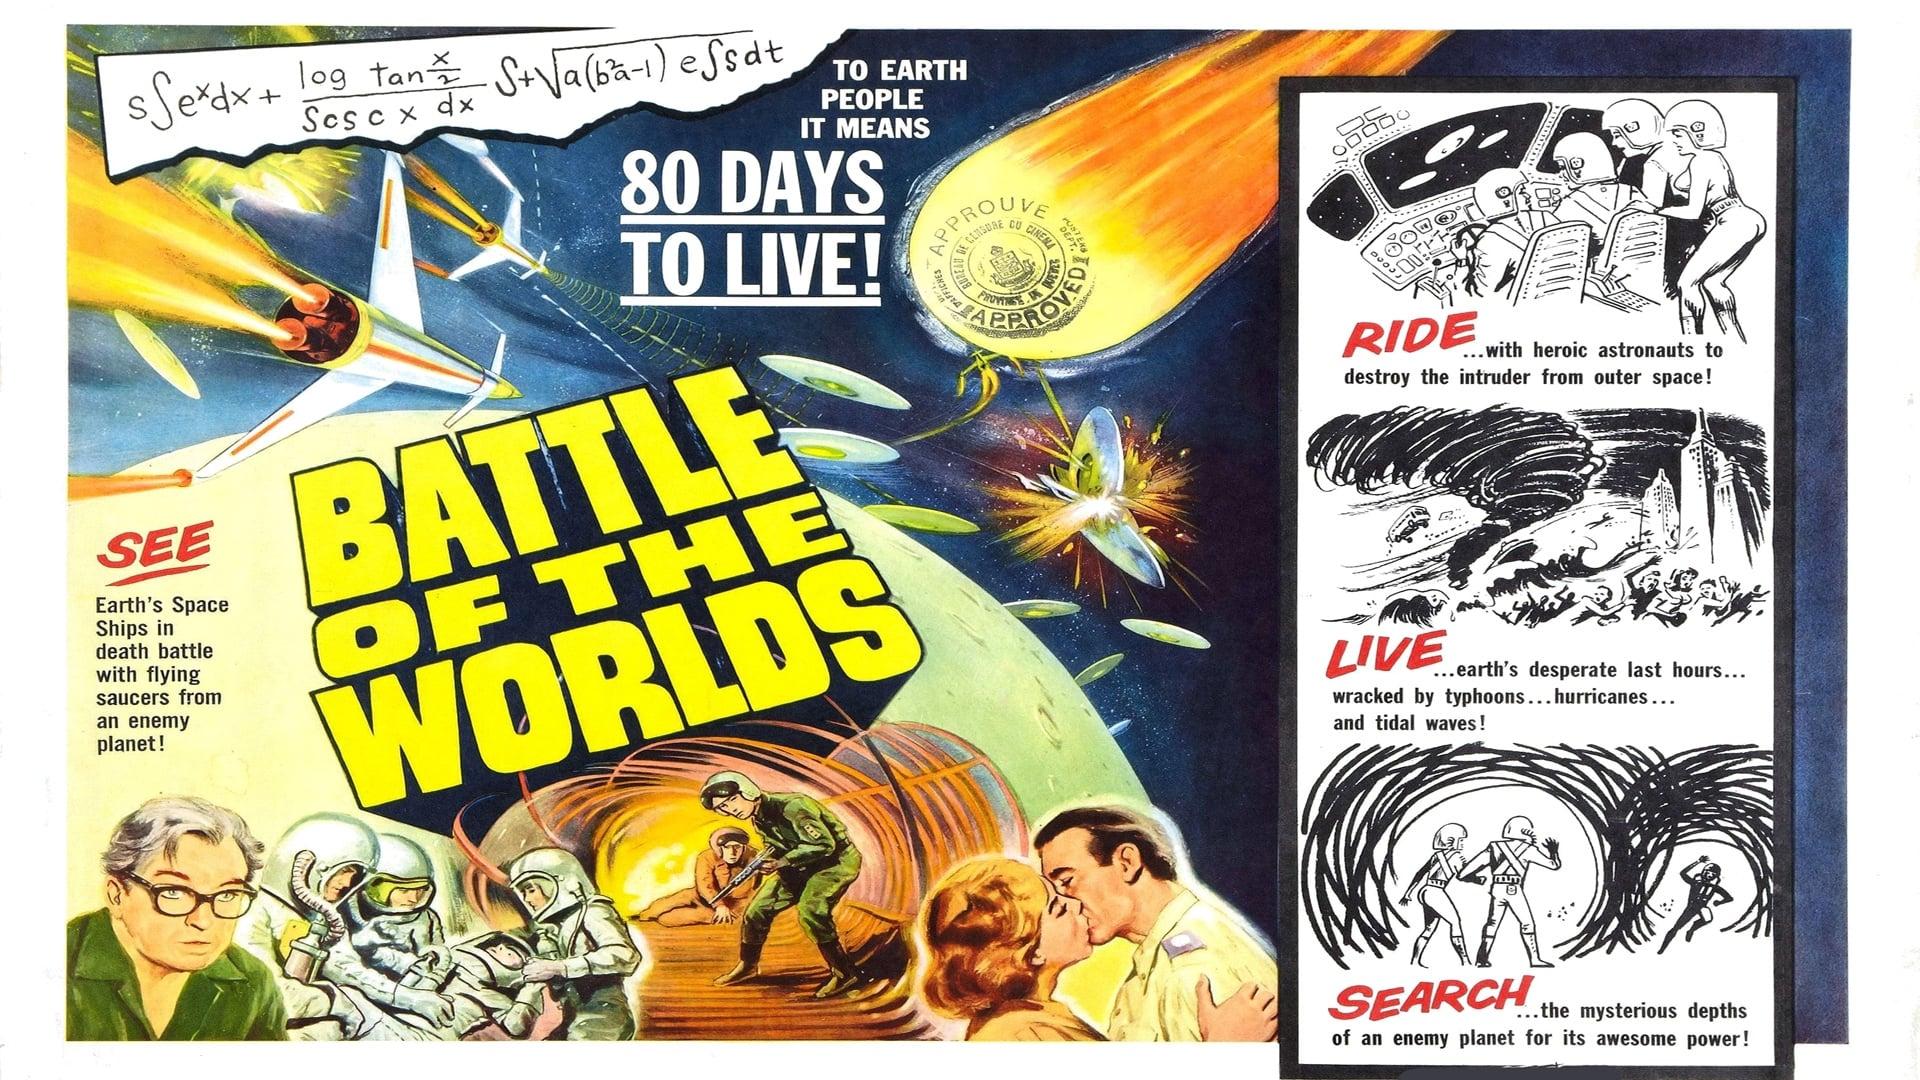 Battle of the Worlds backdrop